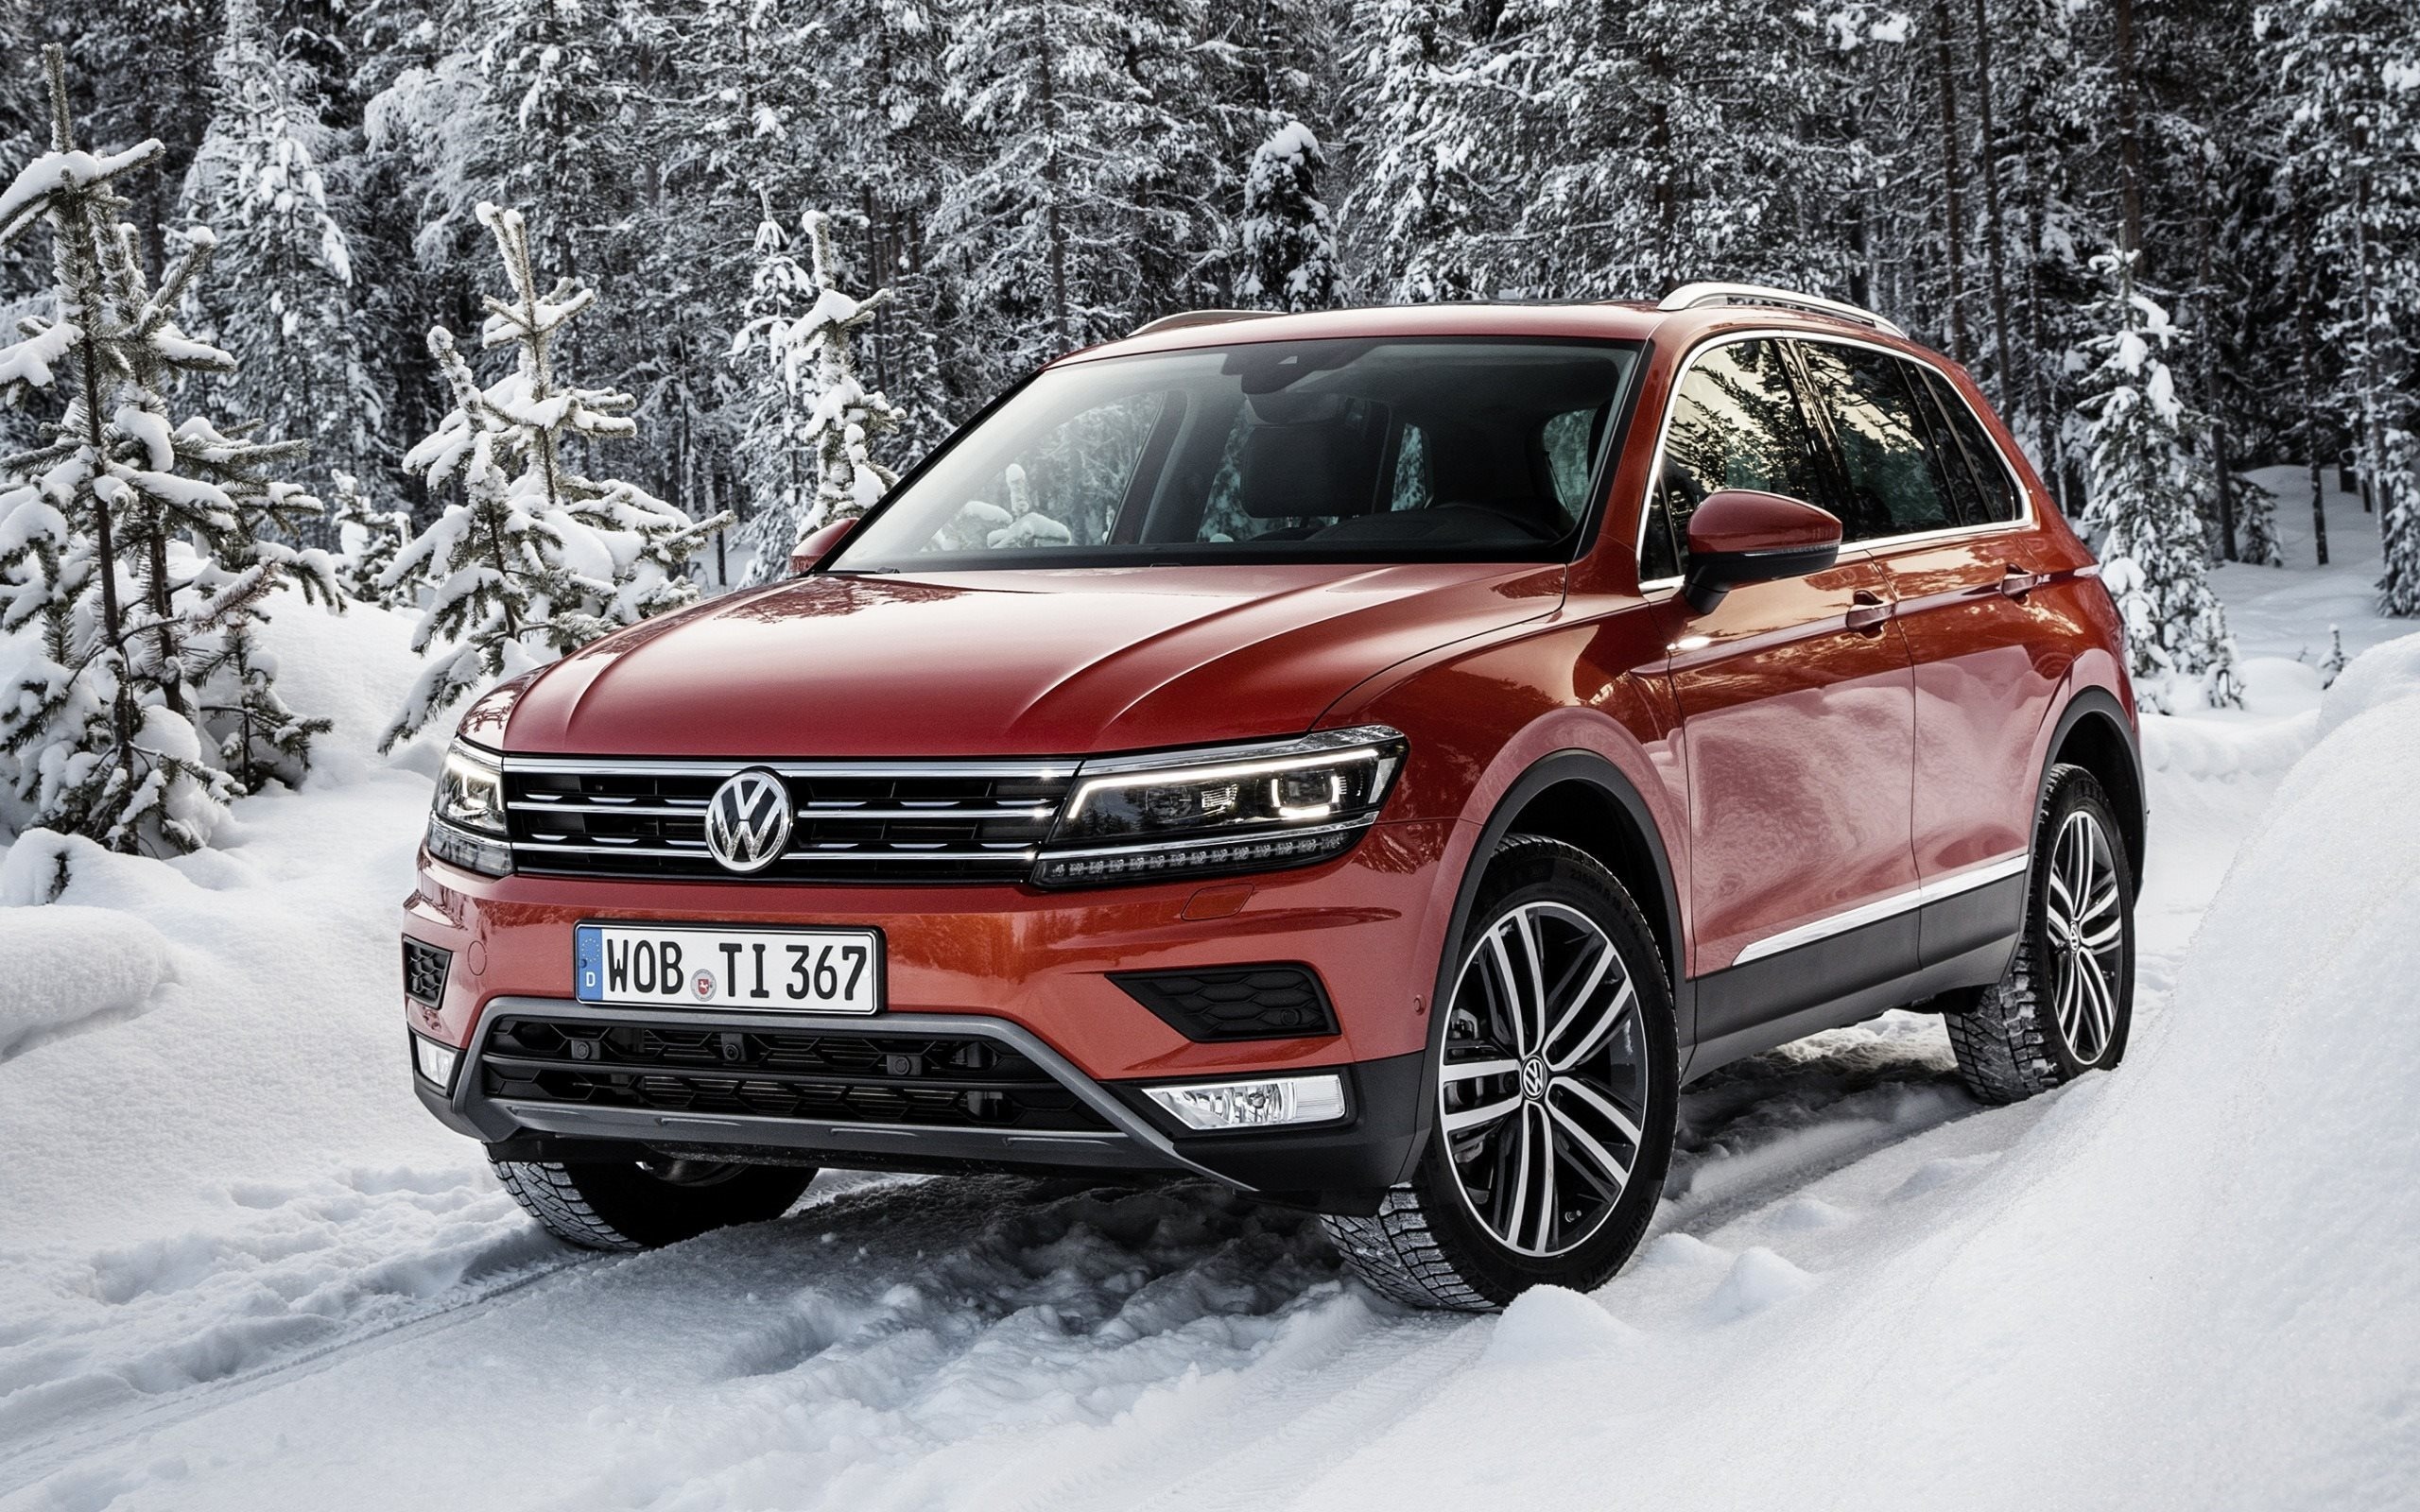 Volkswagen Tiguan 2017 winter, Performance in any condition, Confident and capable, Adventure awaits, 2560x1600 HD Desktop